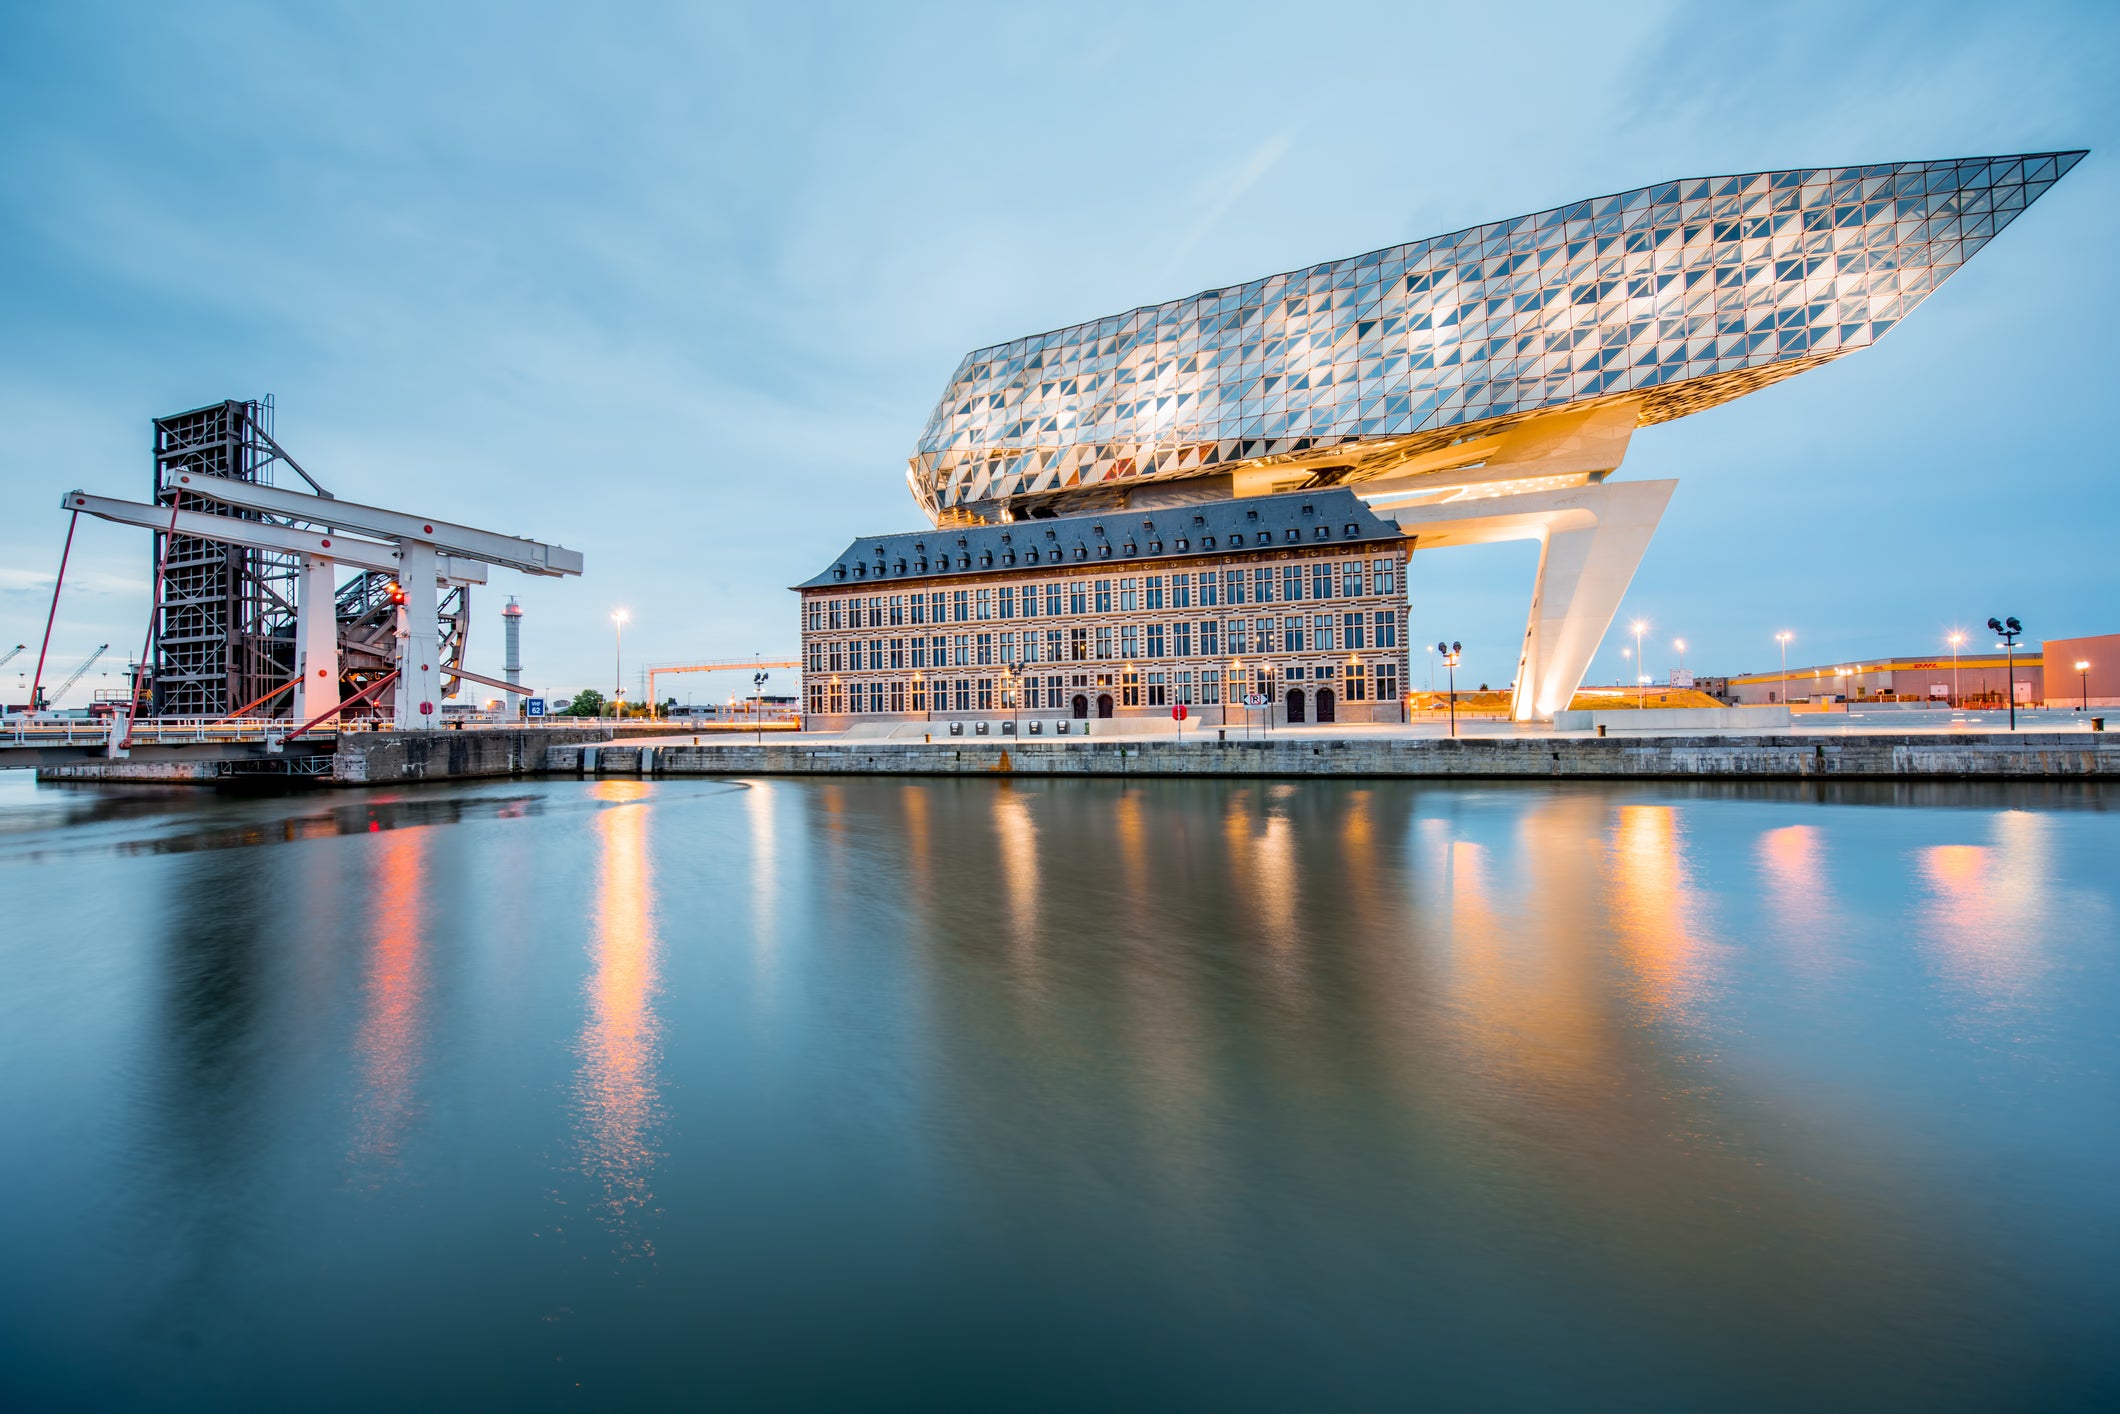 Antwerp’s Port House was designed by the late Zaha Hadid (Getty)